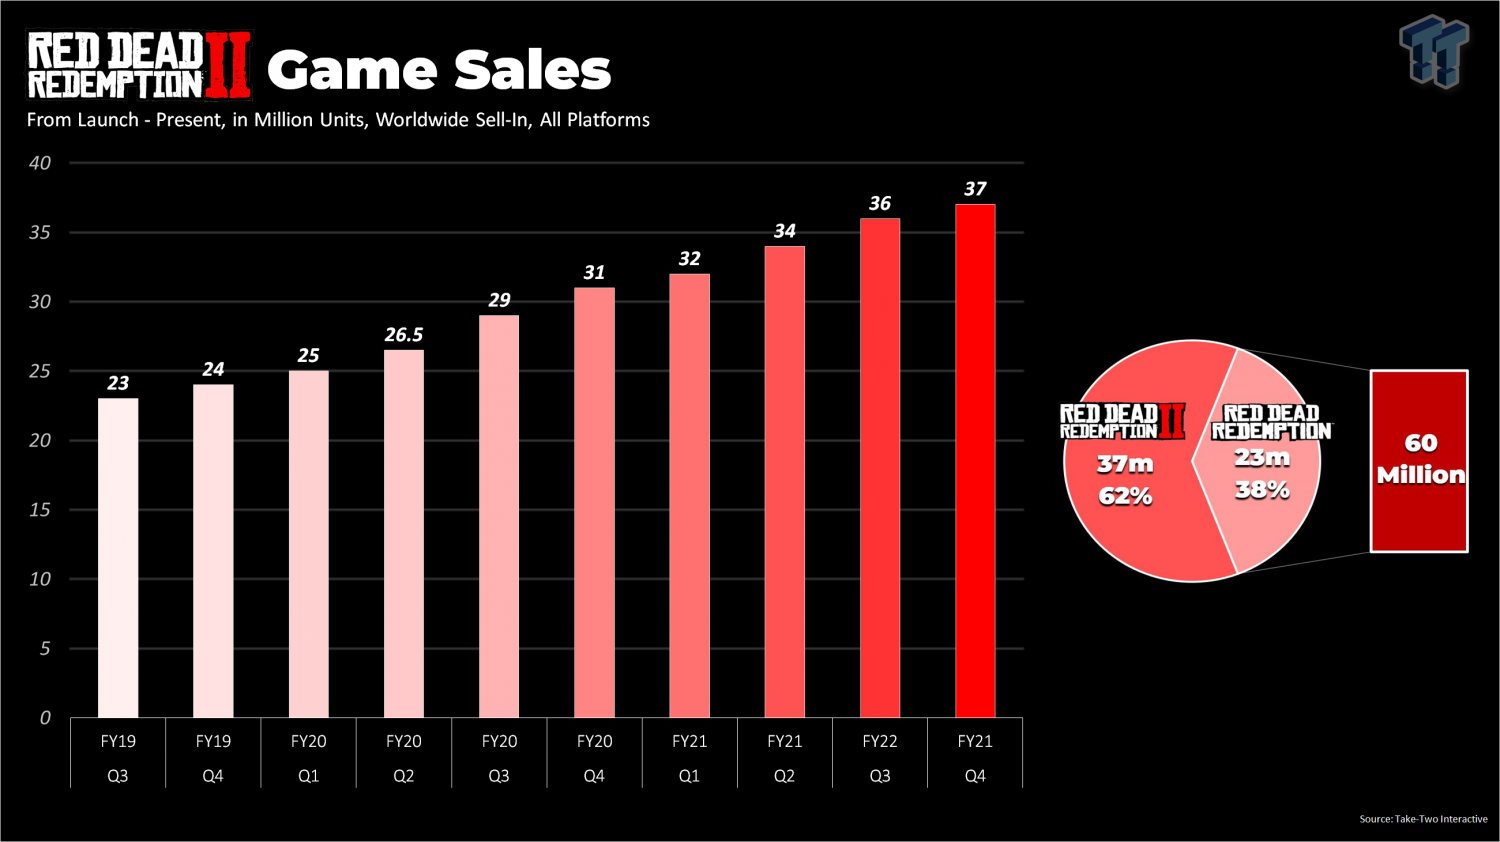 Conceited palm Condense Red Dead Redemption 2 sales figures: RDR2 makes up 62% of IP sales